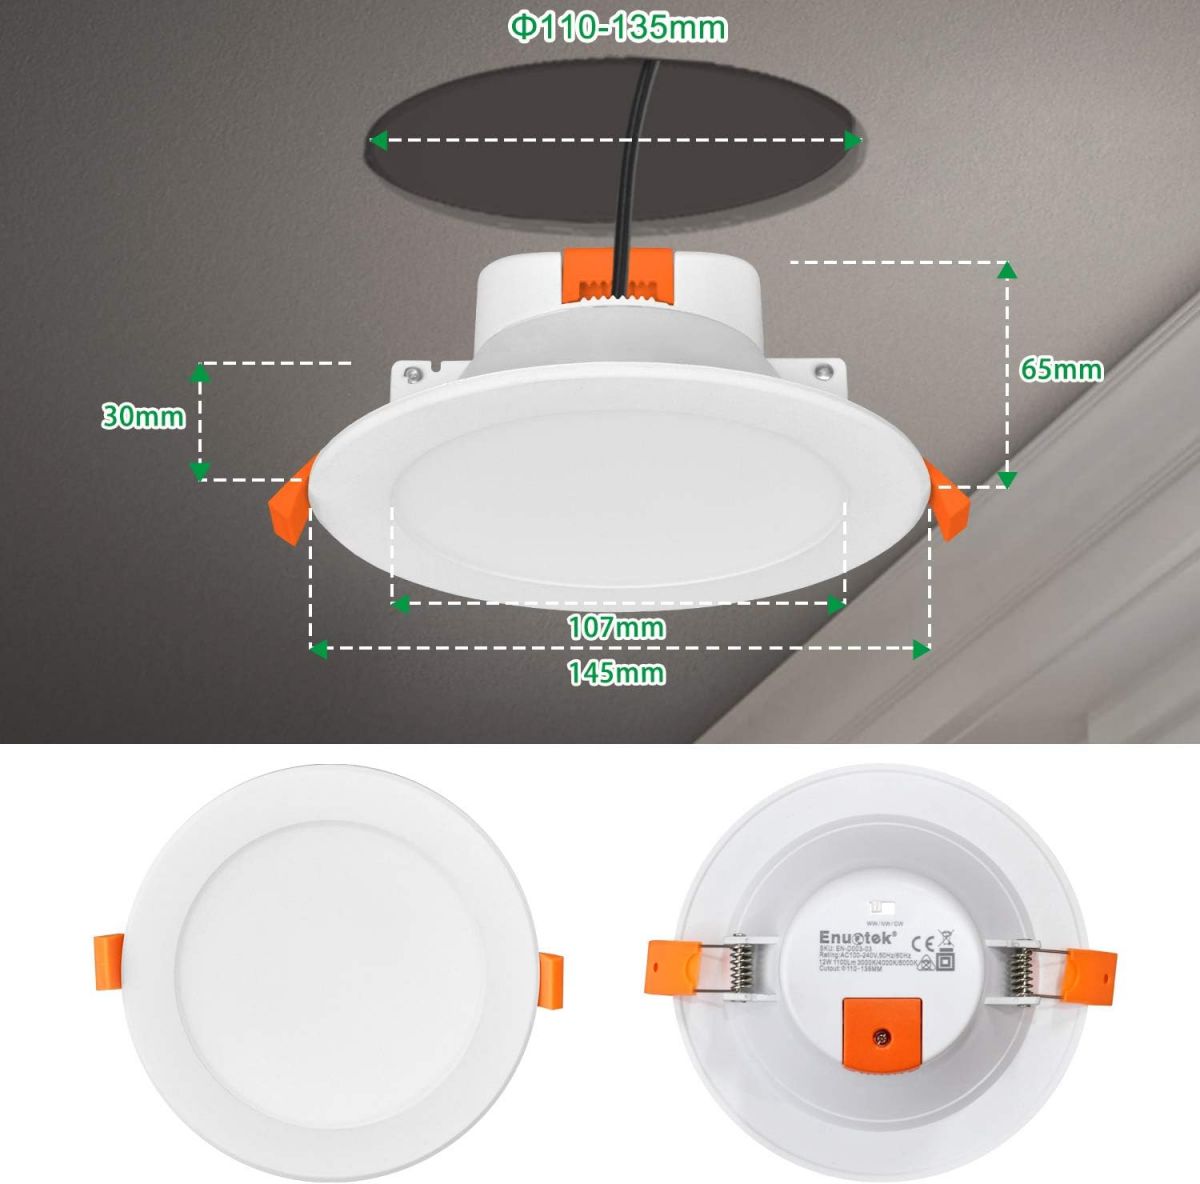 Recessed light ENUOTEK for the bathroom LED/12W, IP44 white